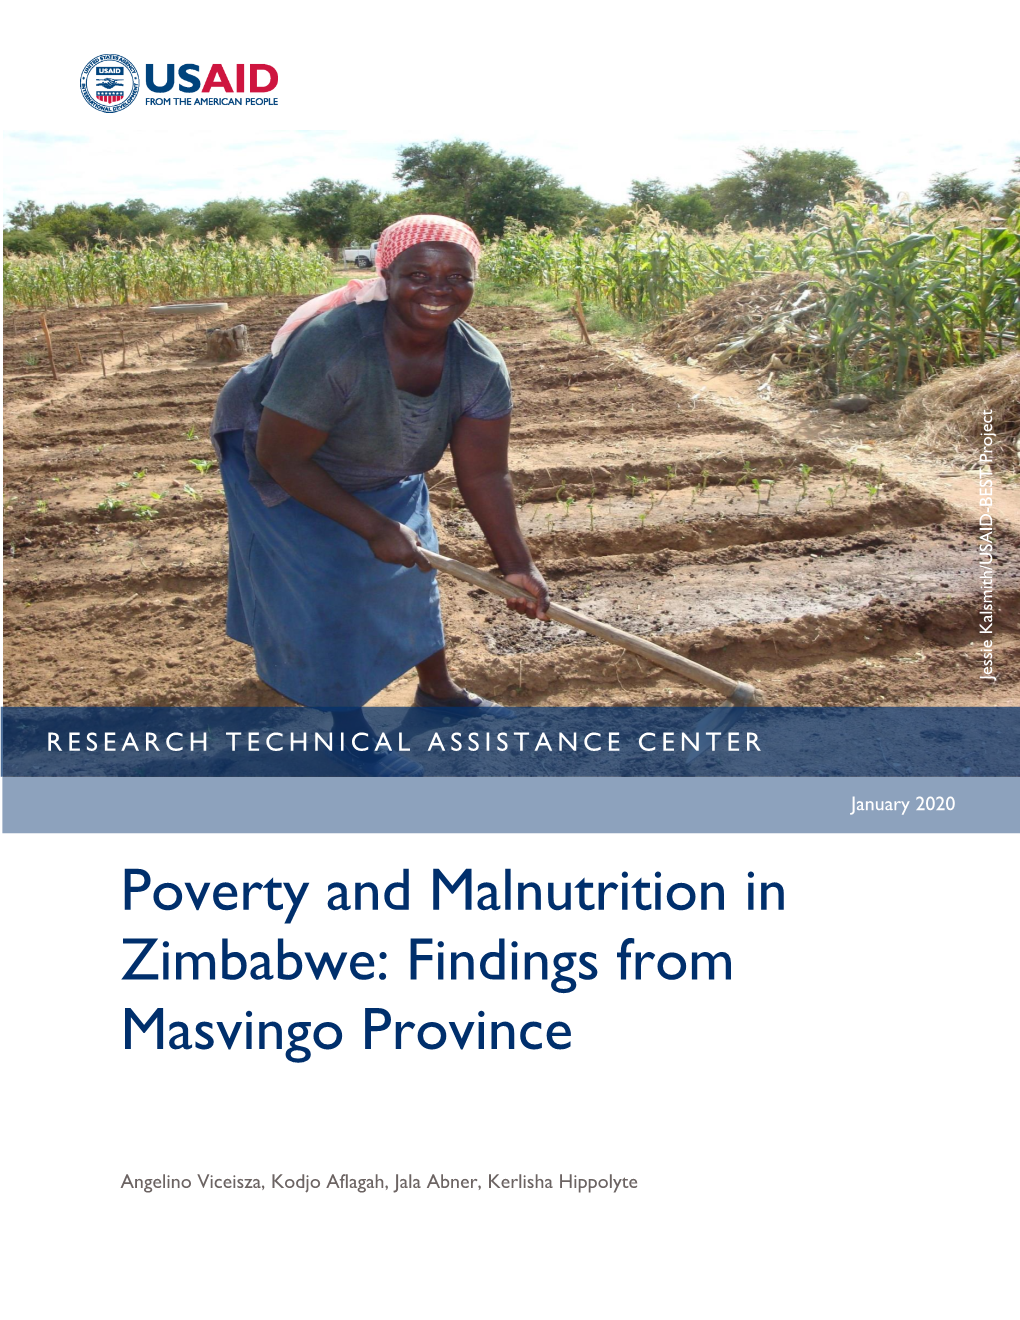 Poverty and Malnutrition in Zimbabwe: Findings from Masvingo Province